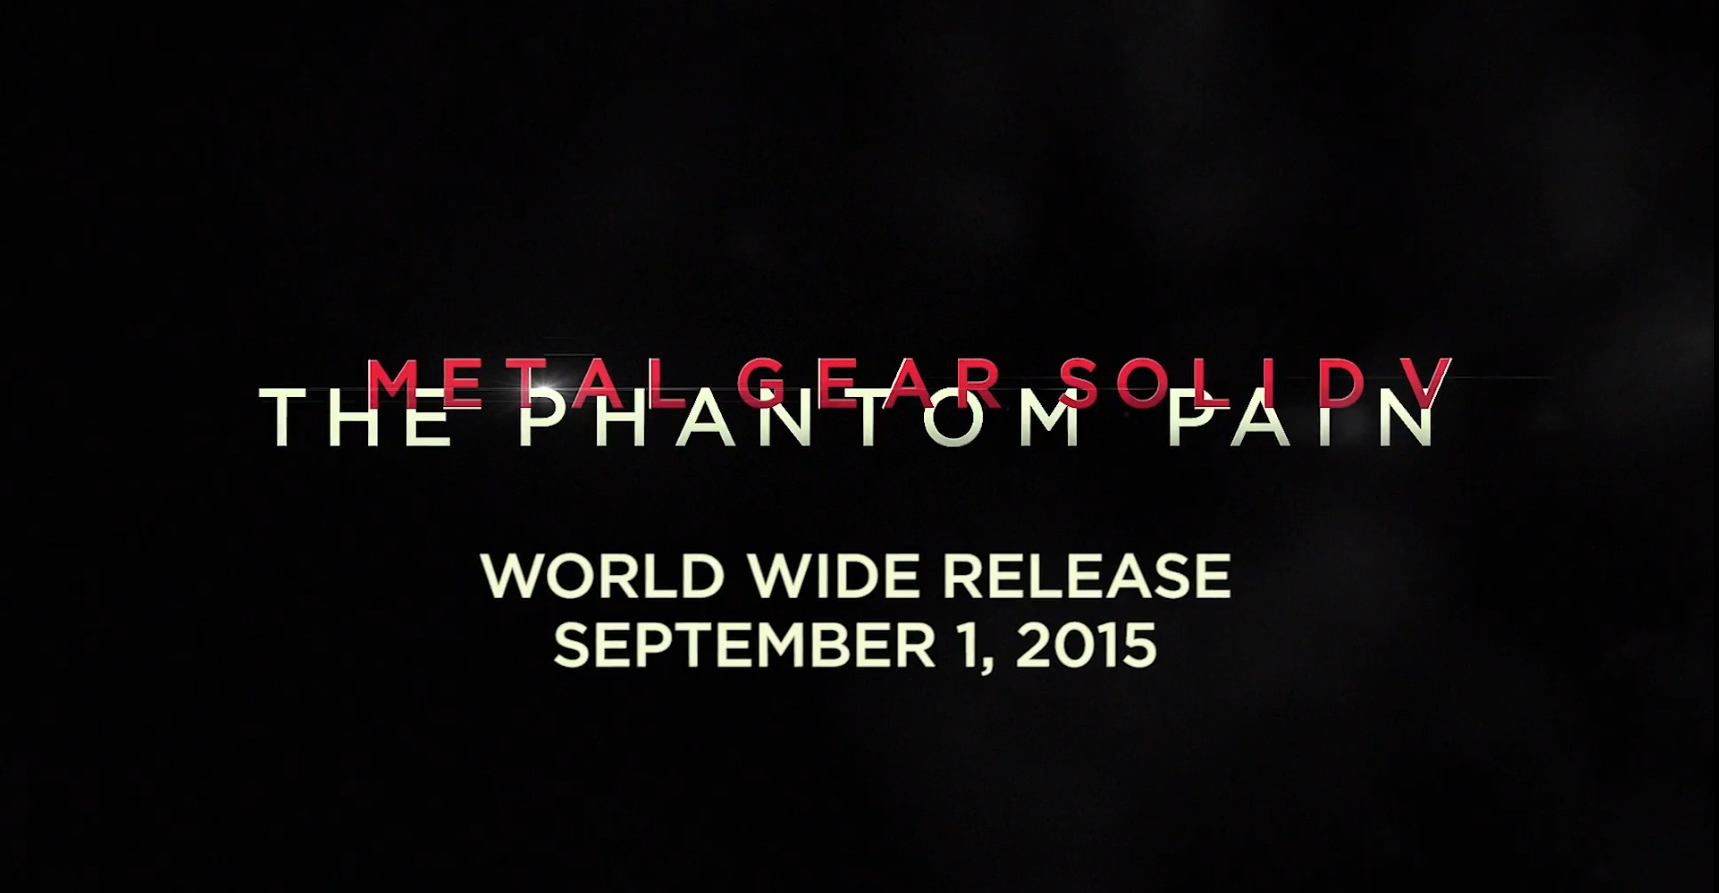 Metal Gear Solid V: The Phantom Pain available on September 1, 2015